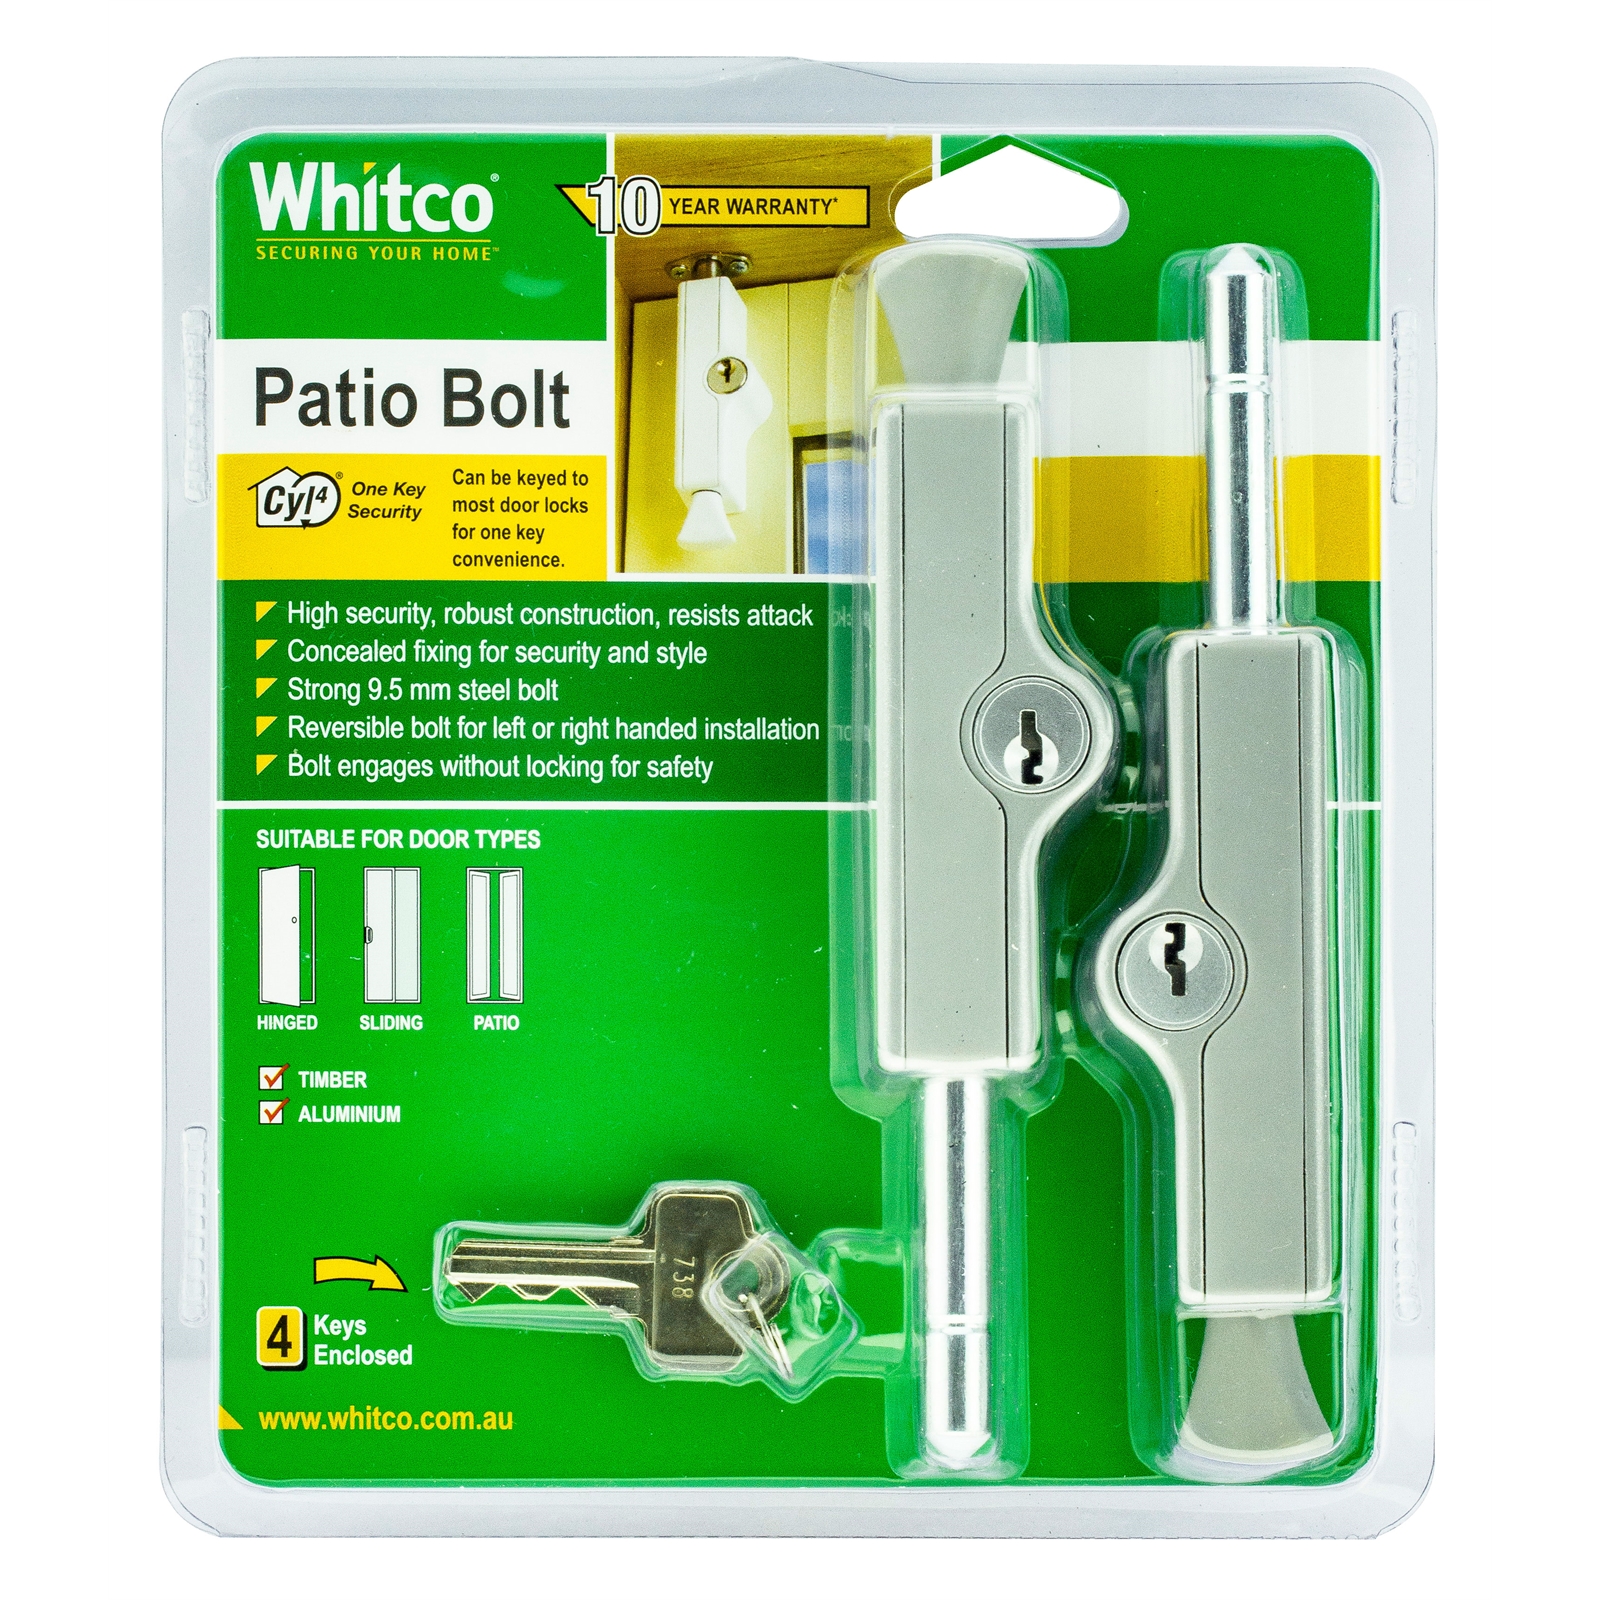 Whitco Silver CYL4 Patio Bolt - 2 Pack